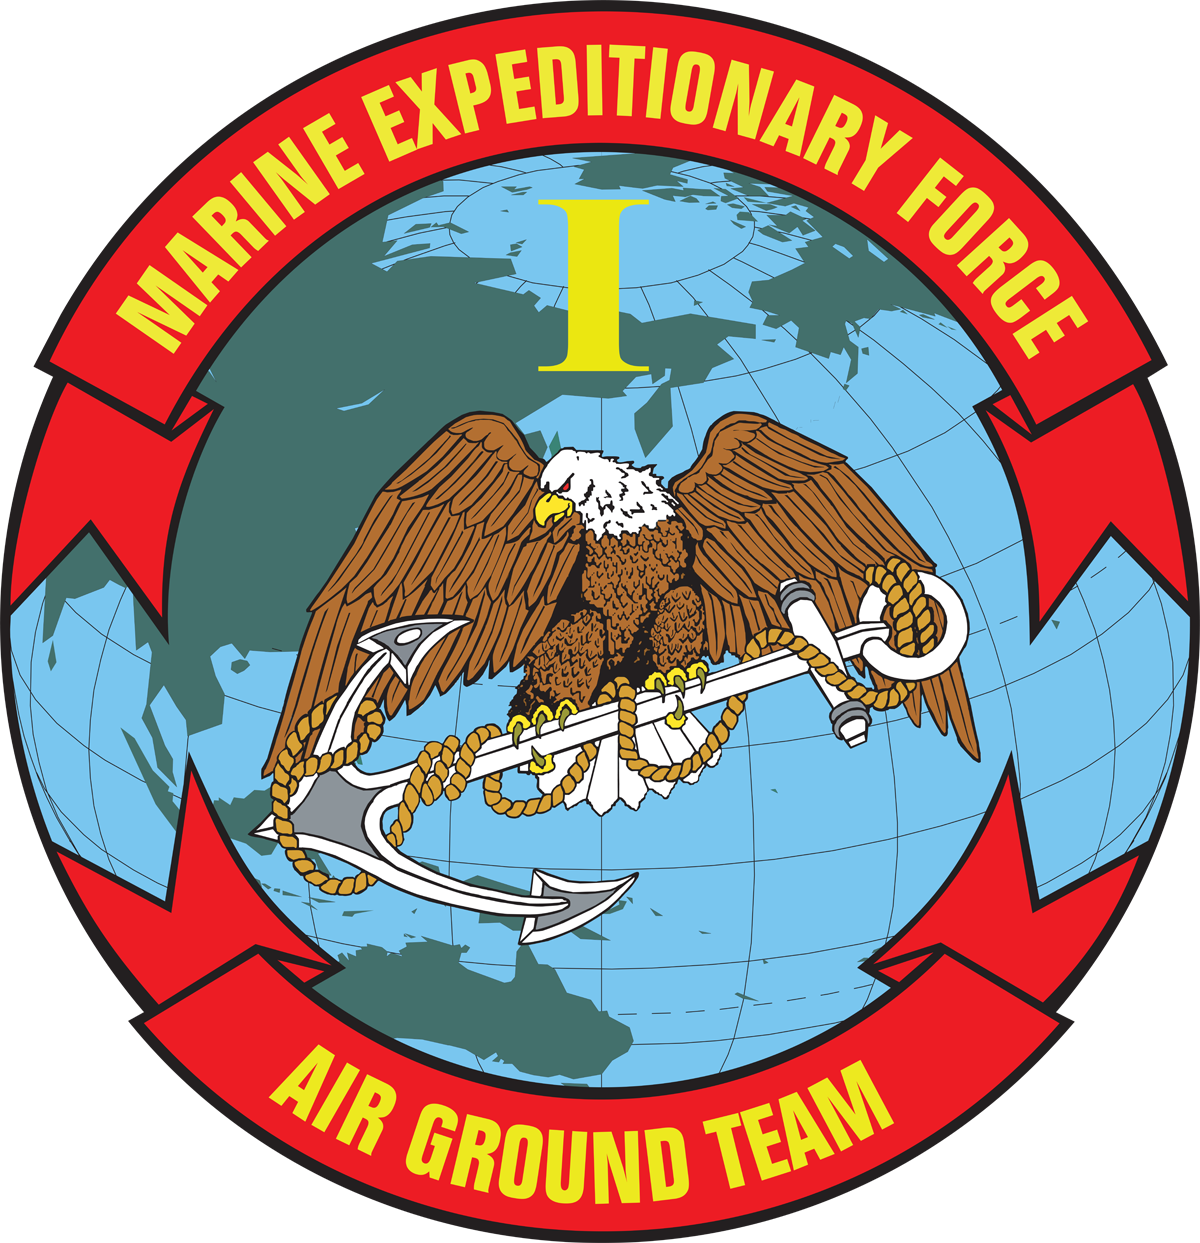 Brig. Gen. Ryan S. “Chick” Rideout > I Marine Expeditionary Force ...